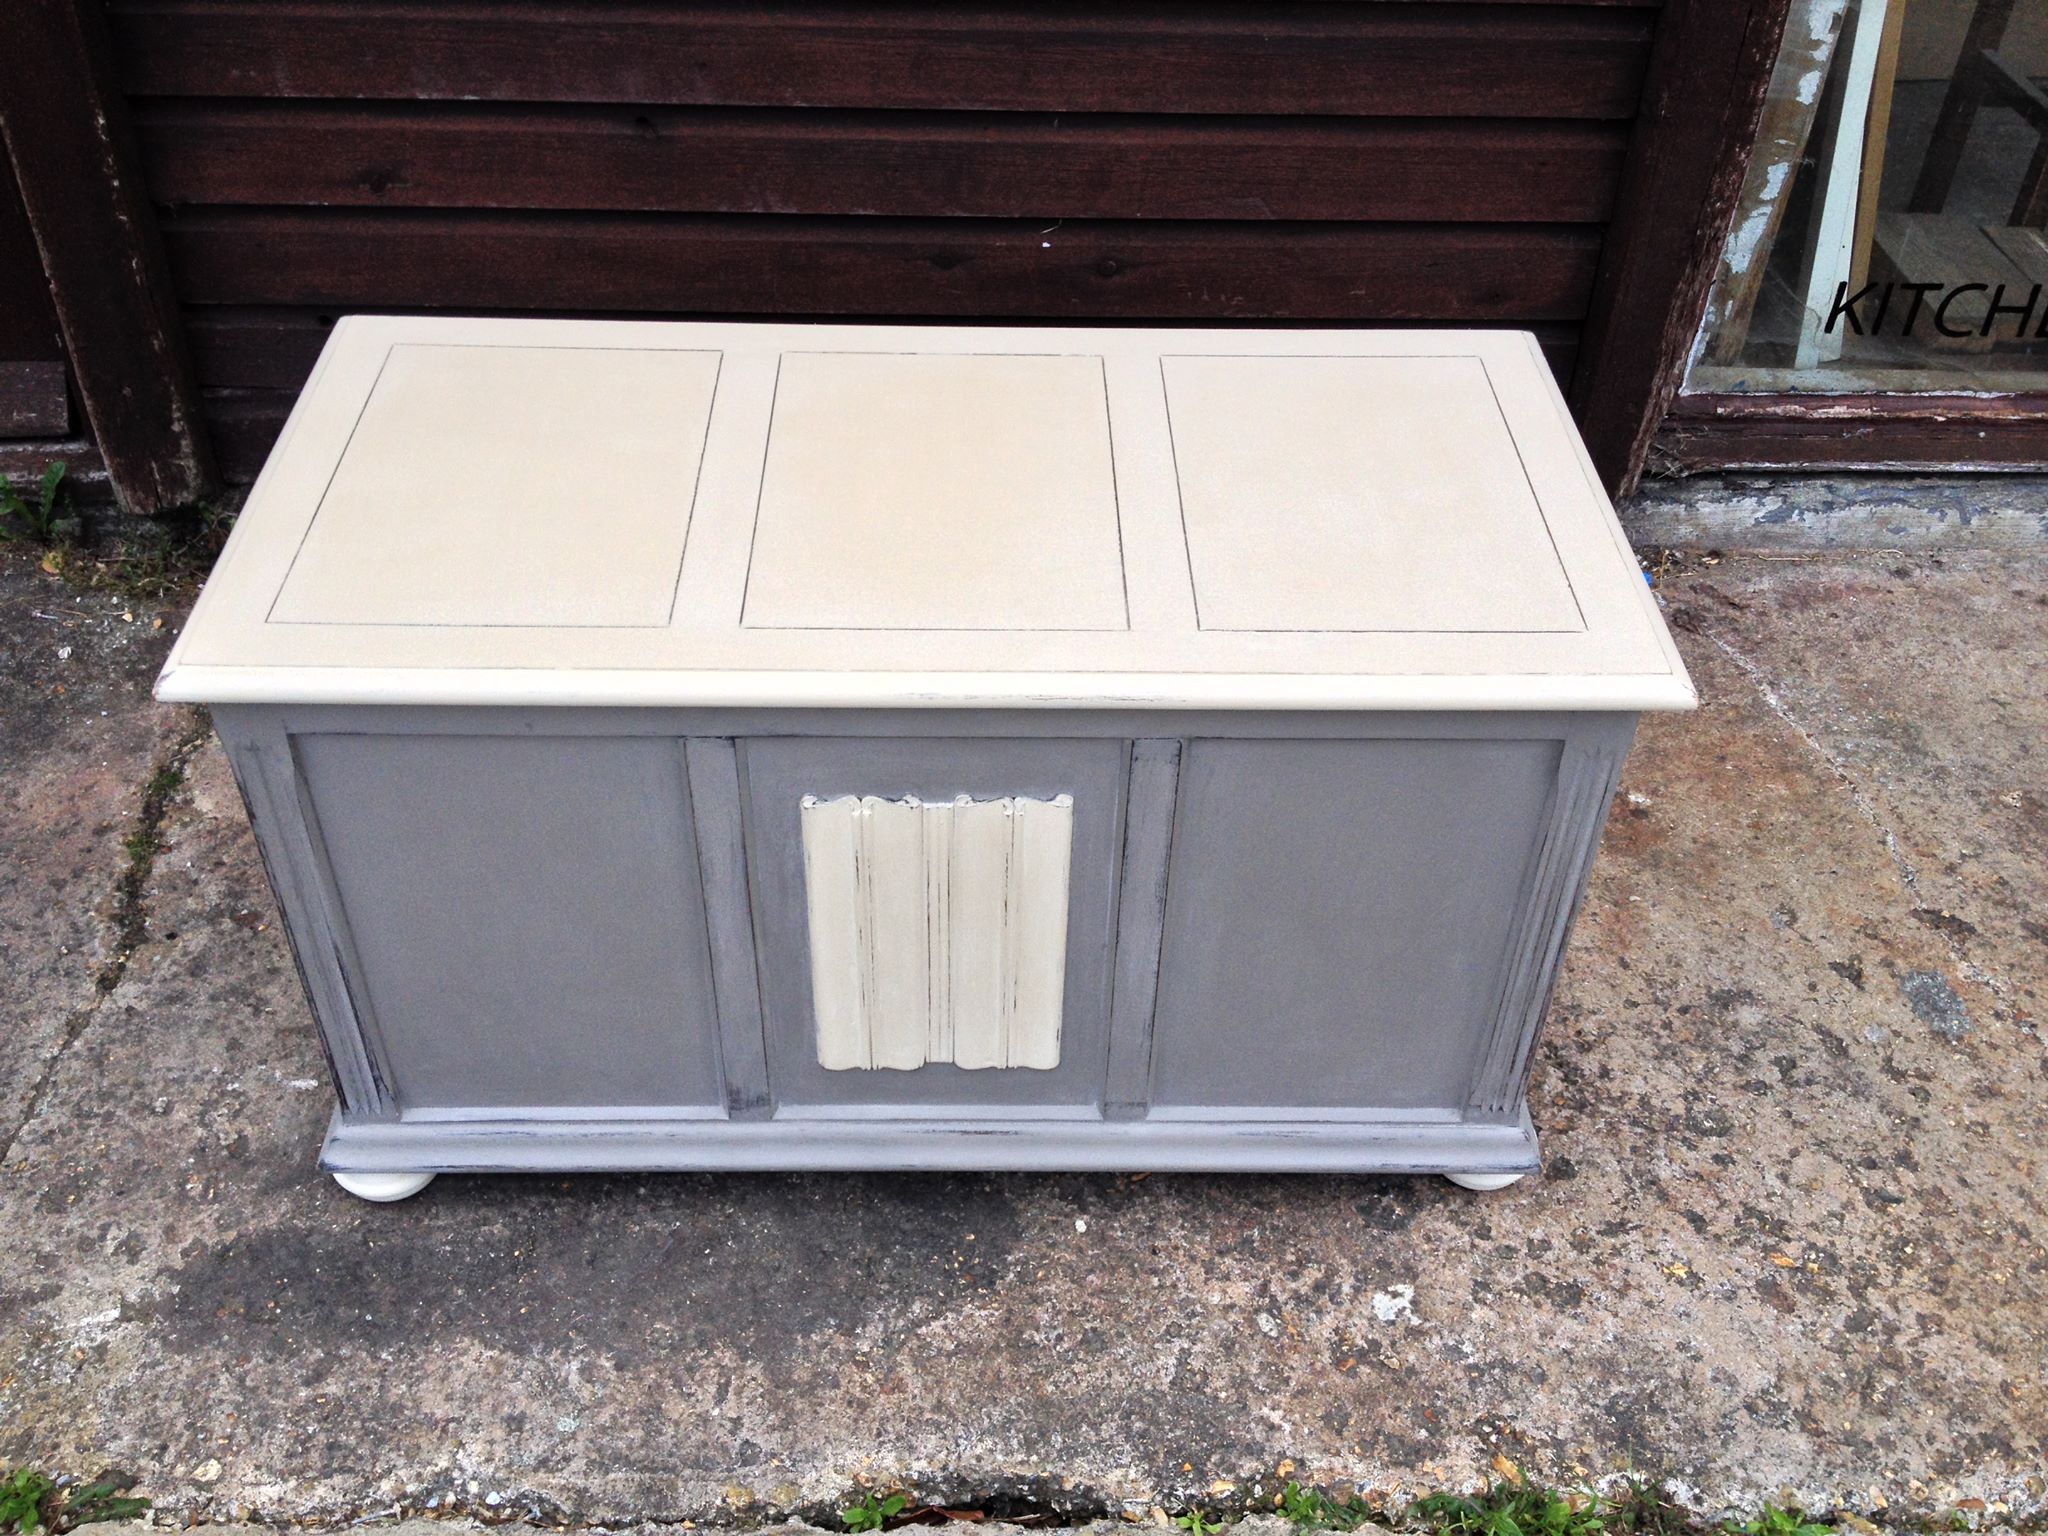 large wooden toy boxes for sale